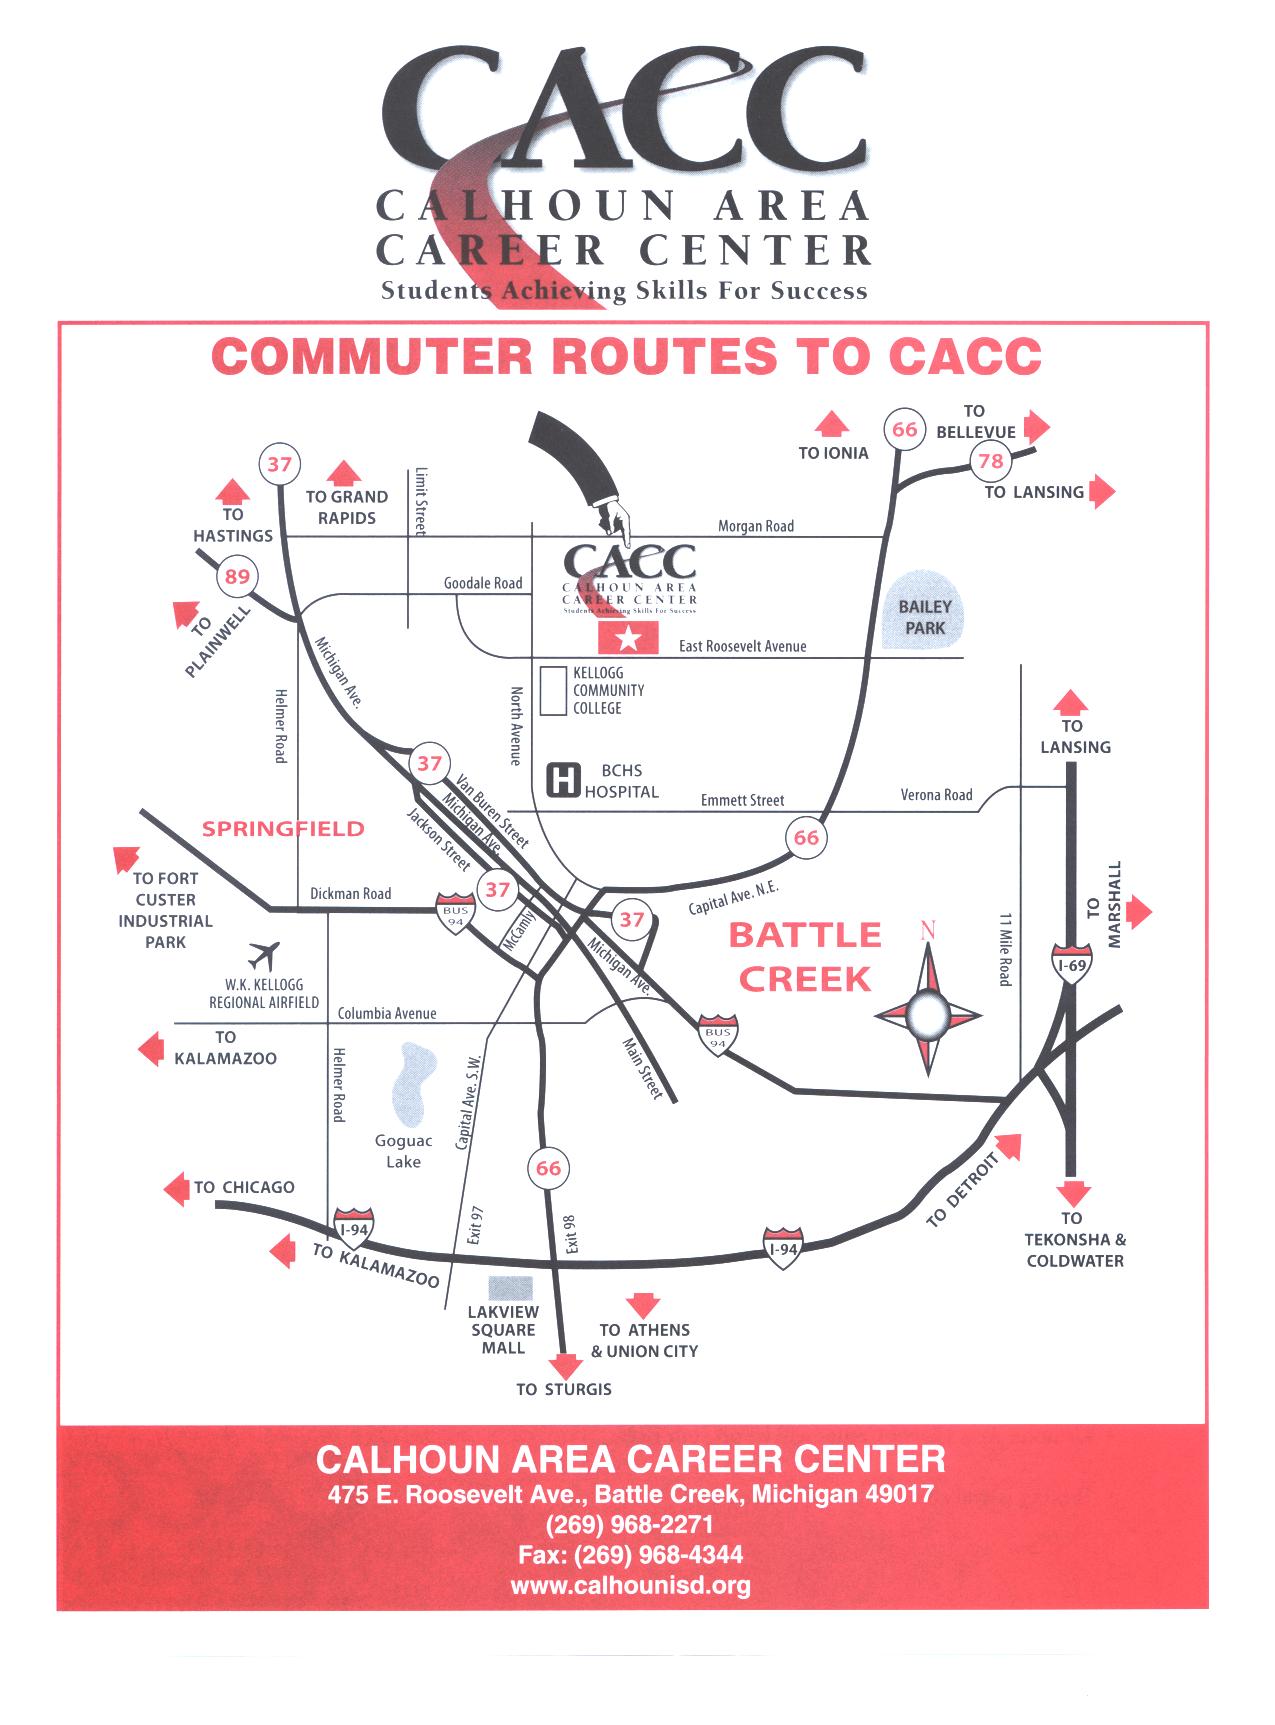 Commuter Routes to CACC